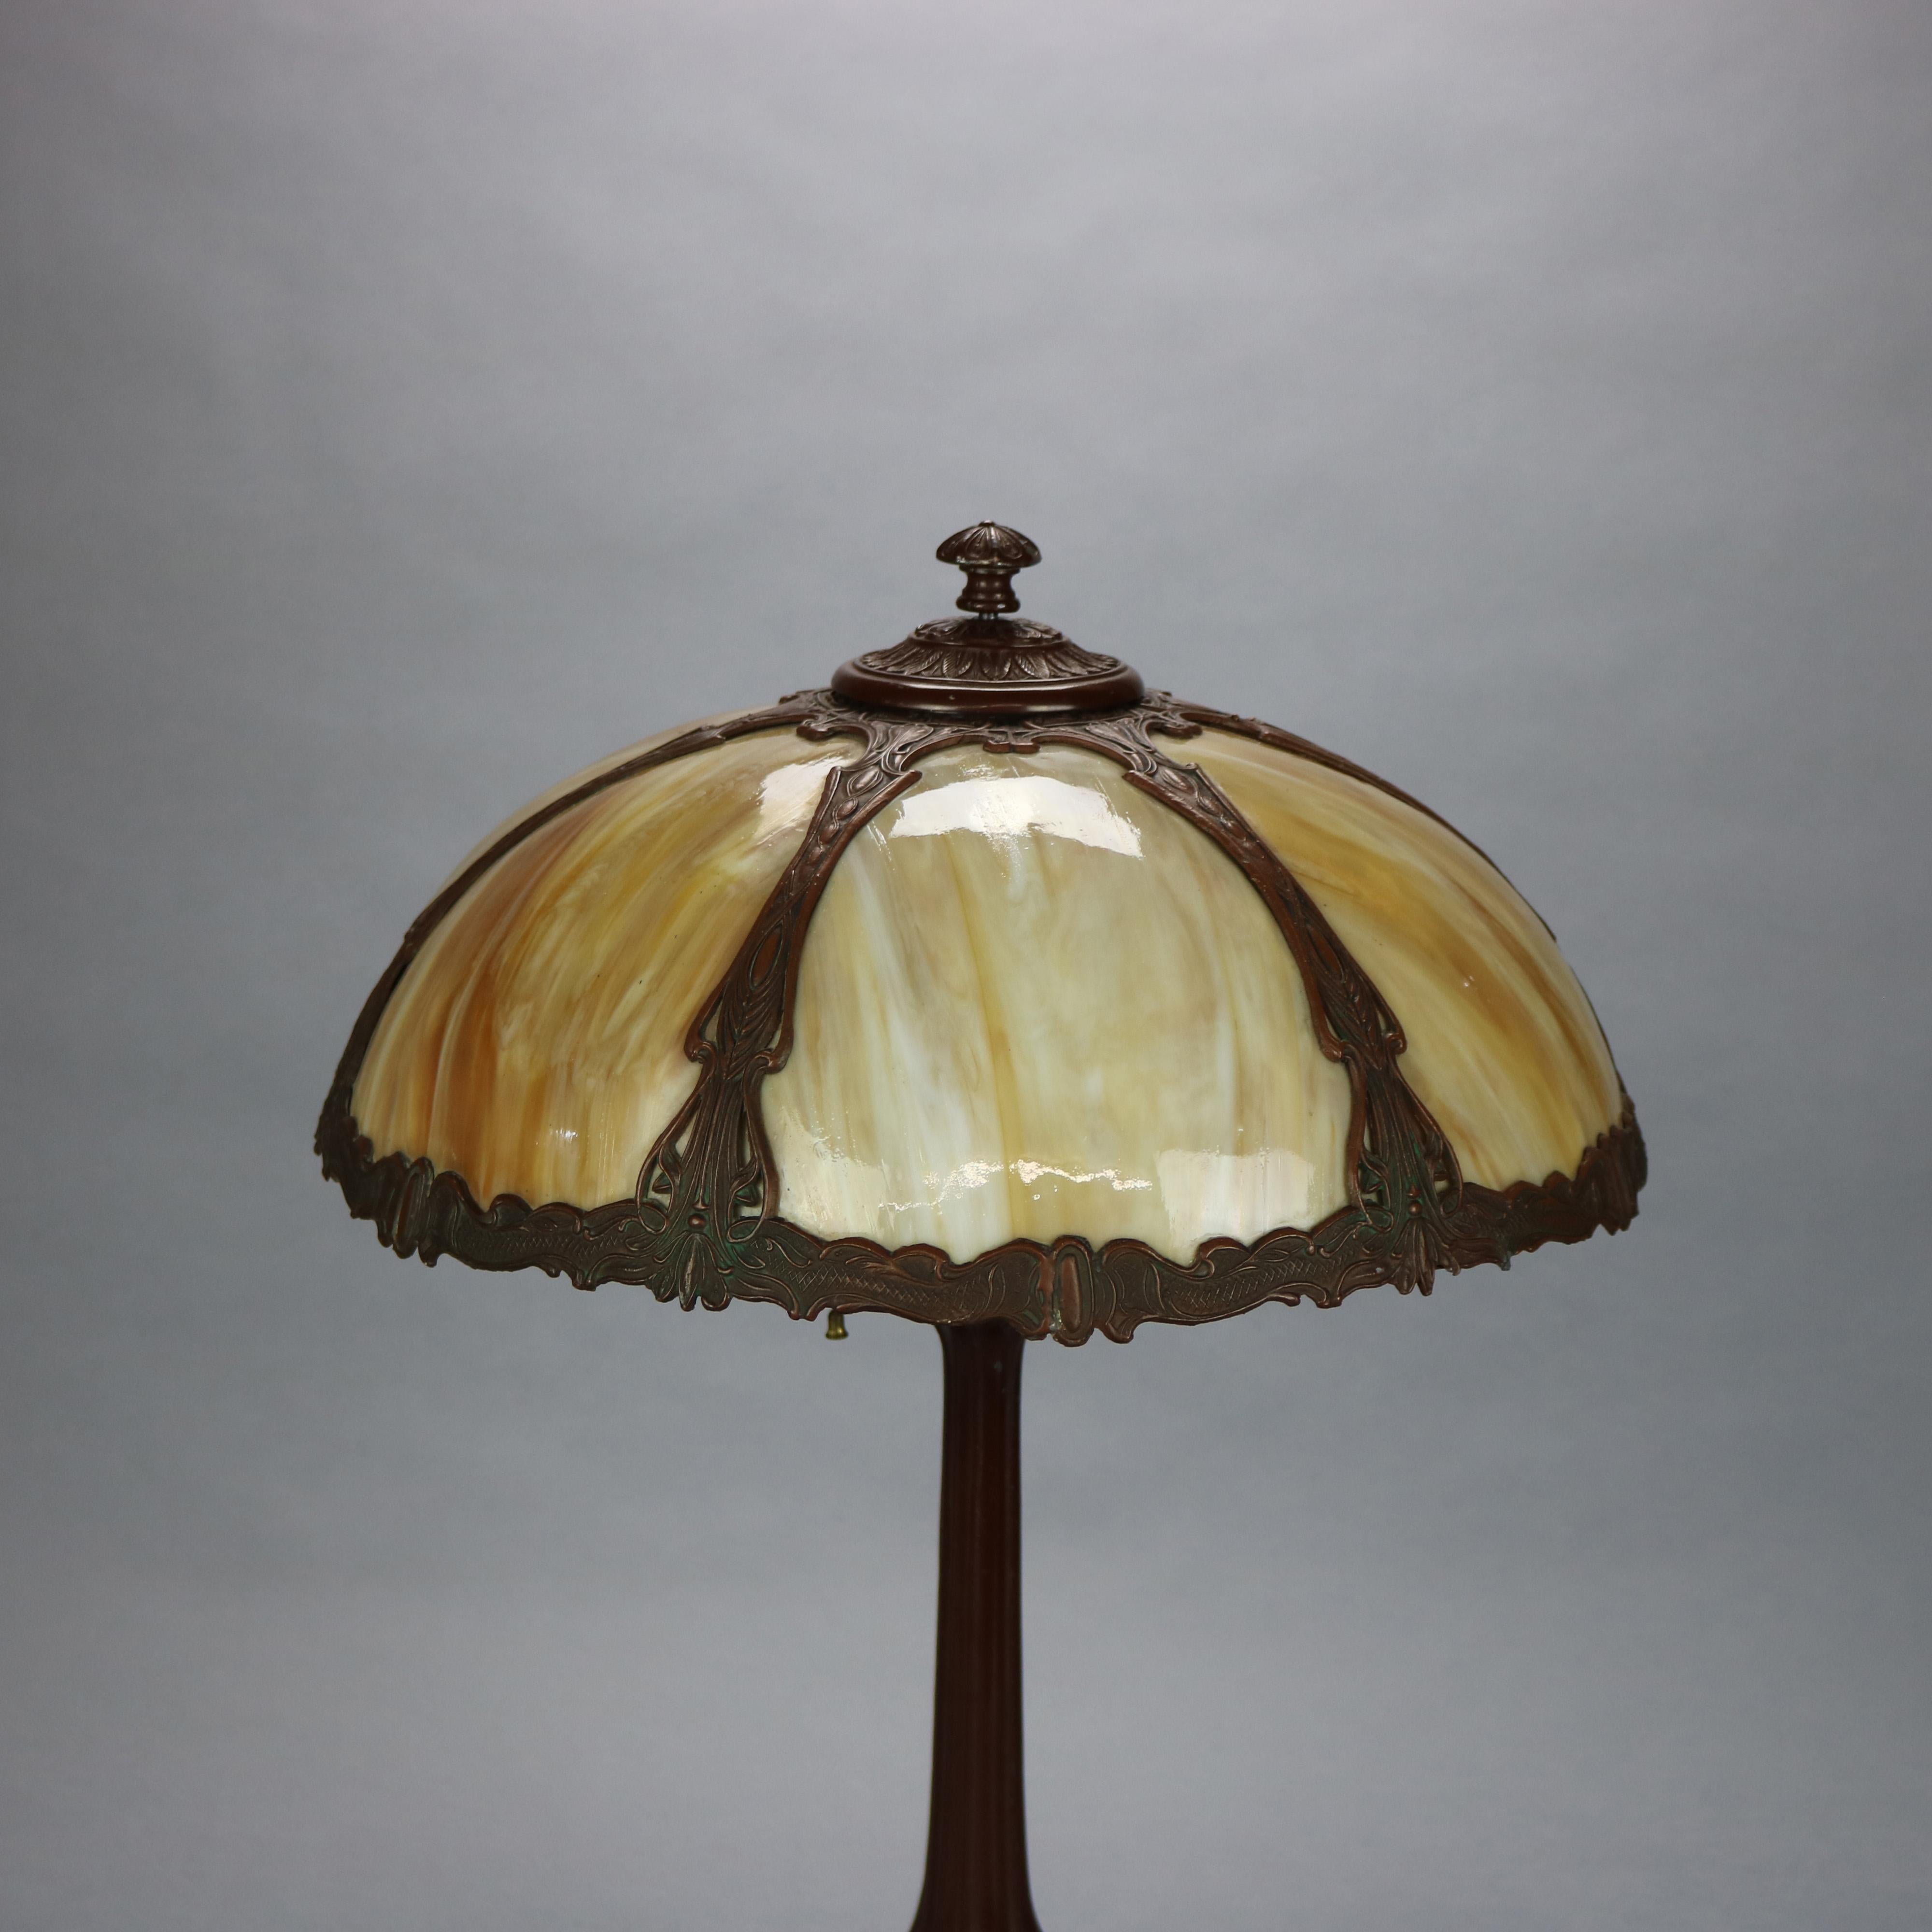 An antique Art and Crafts table lamp in the manner of Bradly and Hubbard offers dome shad housing bent slag glass over cast double socket base, c1910.

Measures: 23